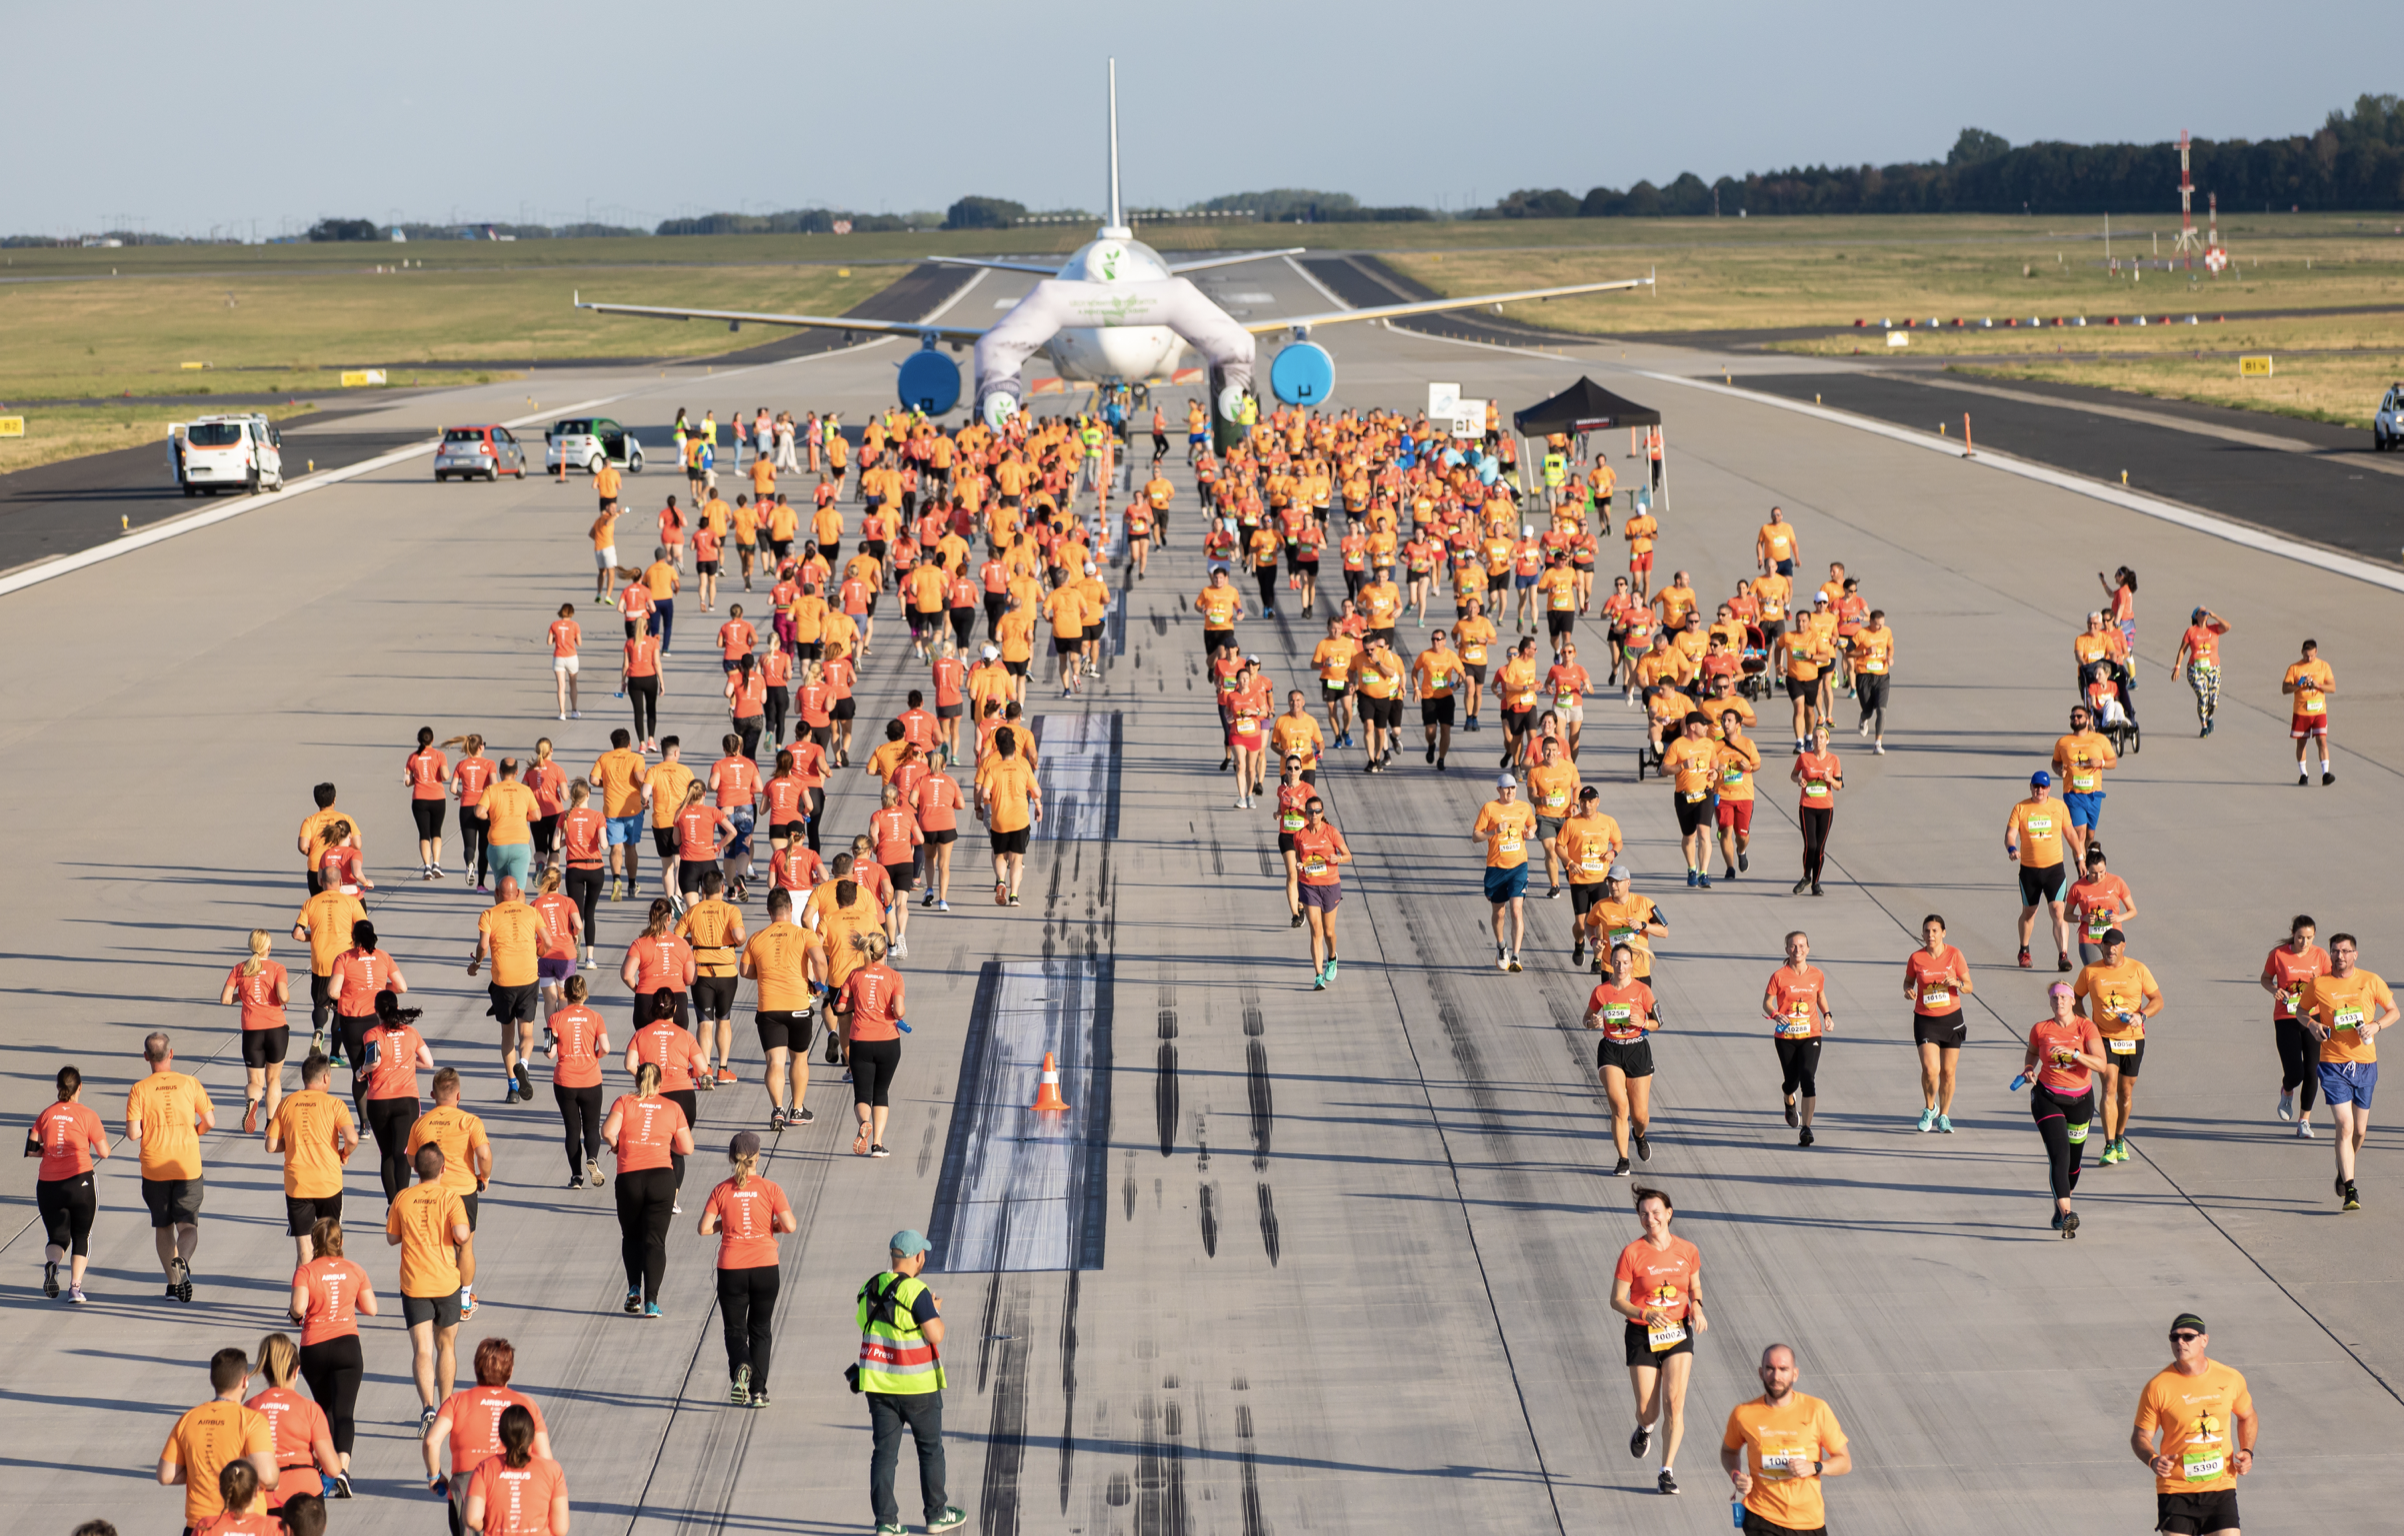 Runway Run Held for the 10th Time